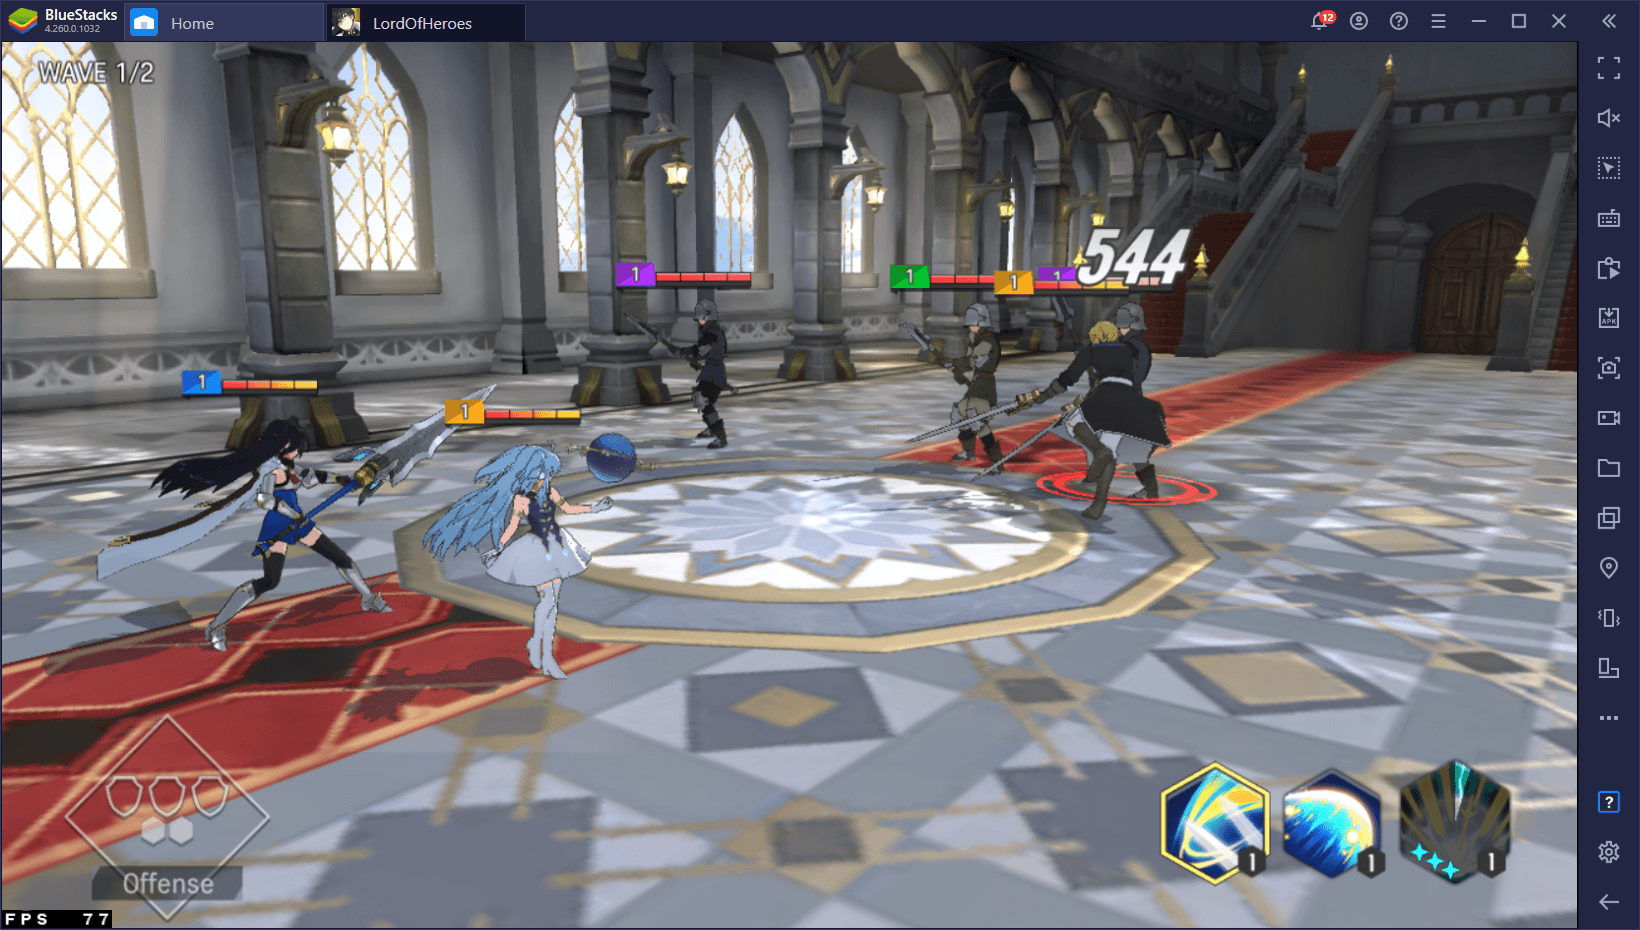 How to Play Lord of Heroes on PC with BlueStacks